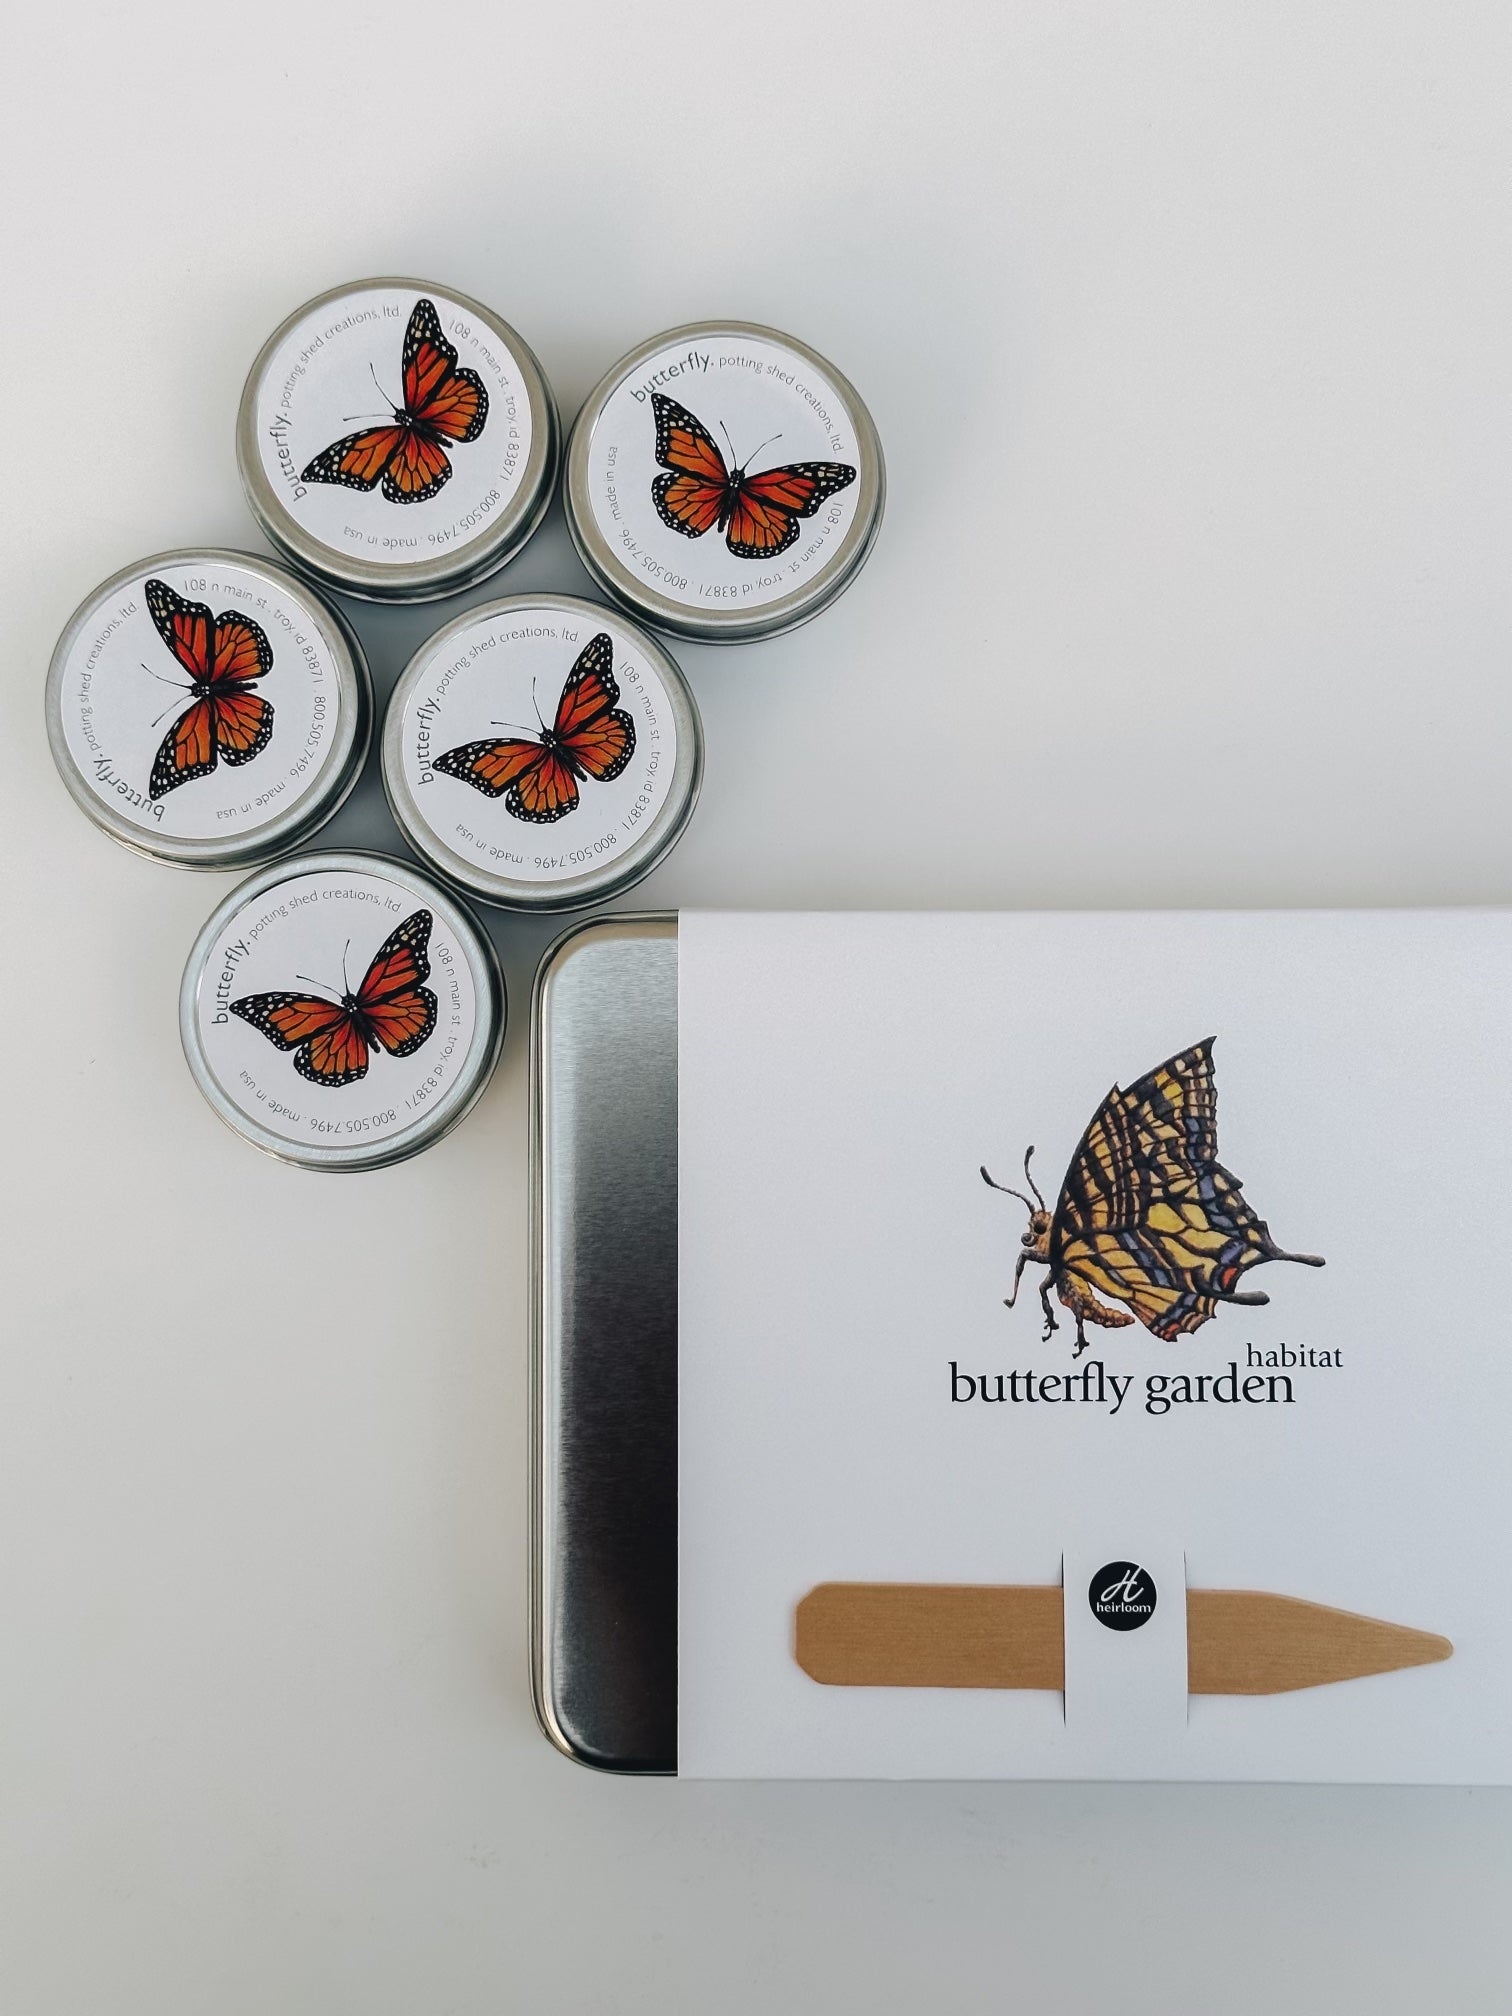 Butterfly garden seed kits and seeds